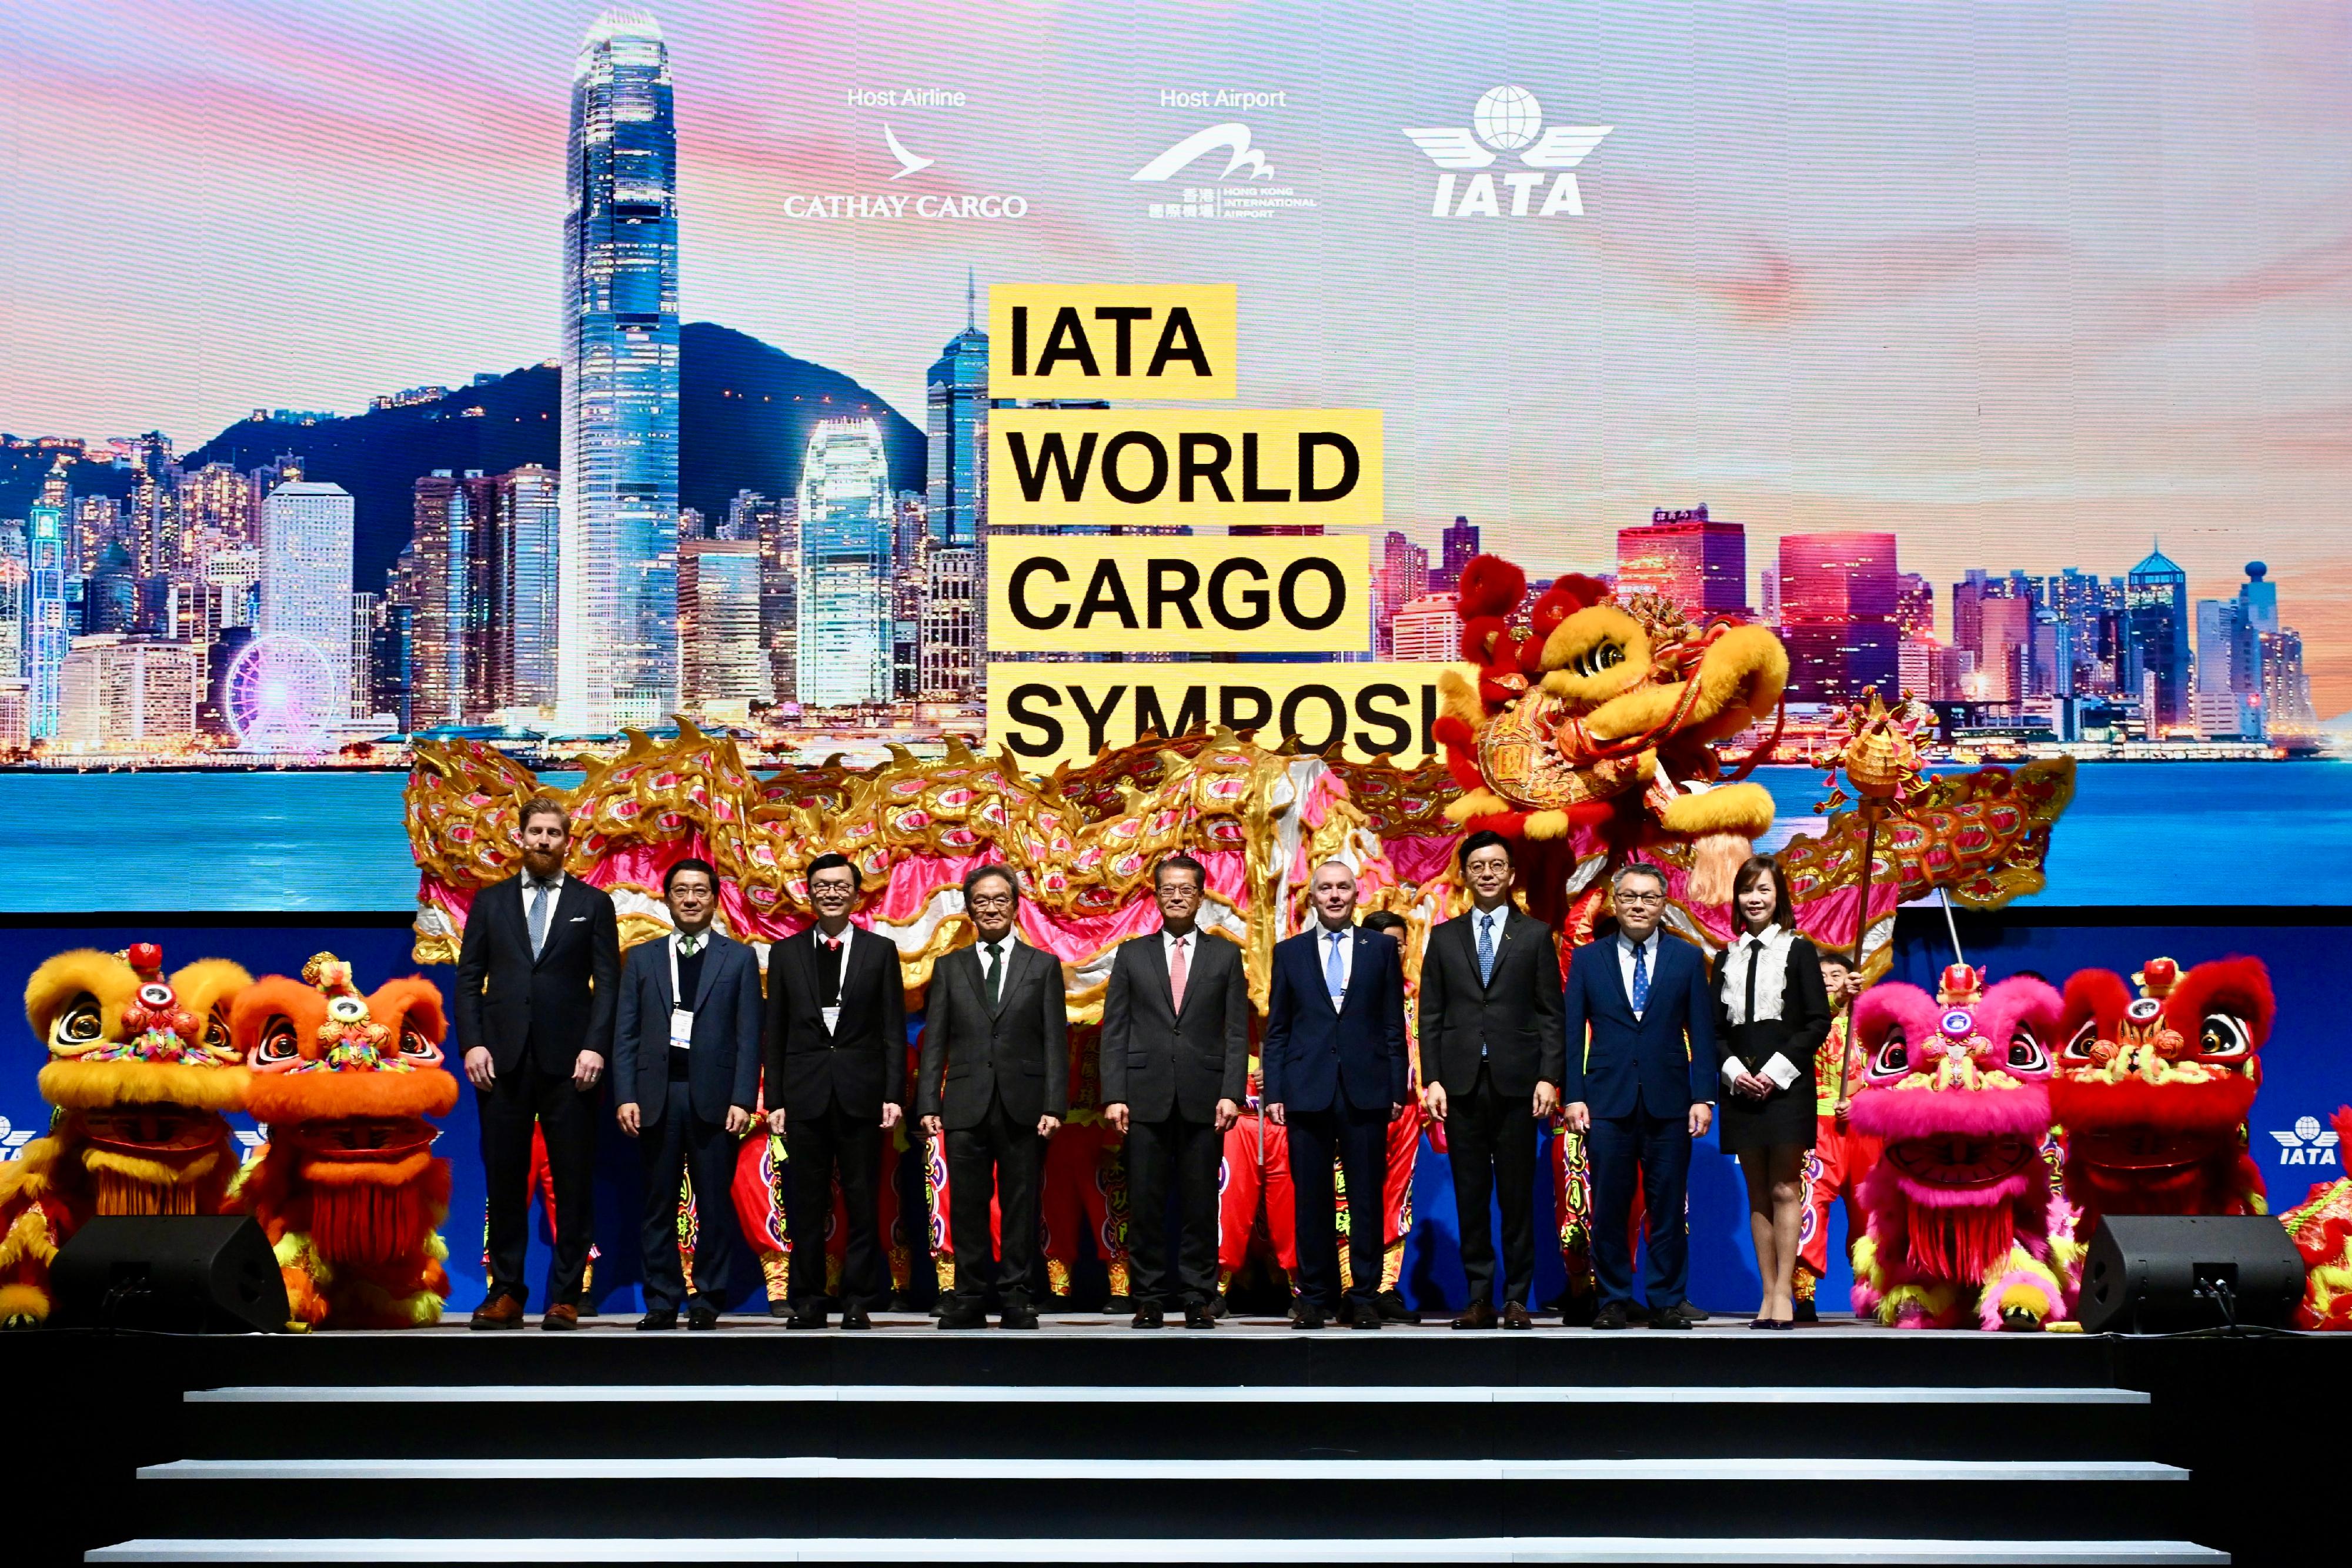 The Financial Secretary, Mr Paul Chan, attended the International Air Transport Association (IATA) World Cargo Symposium today (March 12). Photo shows (from left) the Global Head of Cargo of the IATA, Mr Brendan Sullivan; the Chief Executive Officer of the Airport Authority Hong Kong (AAHK), Mr Fred Lam; the Acting Secretary for Transport and Logistics, Mr Liu Chun-san; the Chairman of the AAHK, Mr Jack So; Mr Chan; the Director General of the IATA, Mr Willie Walsh; the Chief Executive Officer of the Cathay Pacific Group, Mr Ronald Lam, and other guests at the event.
